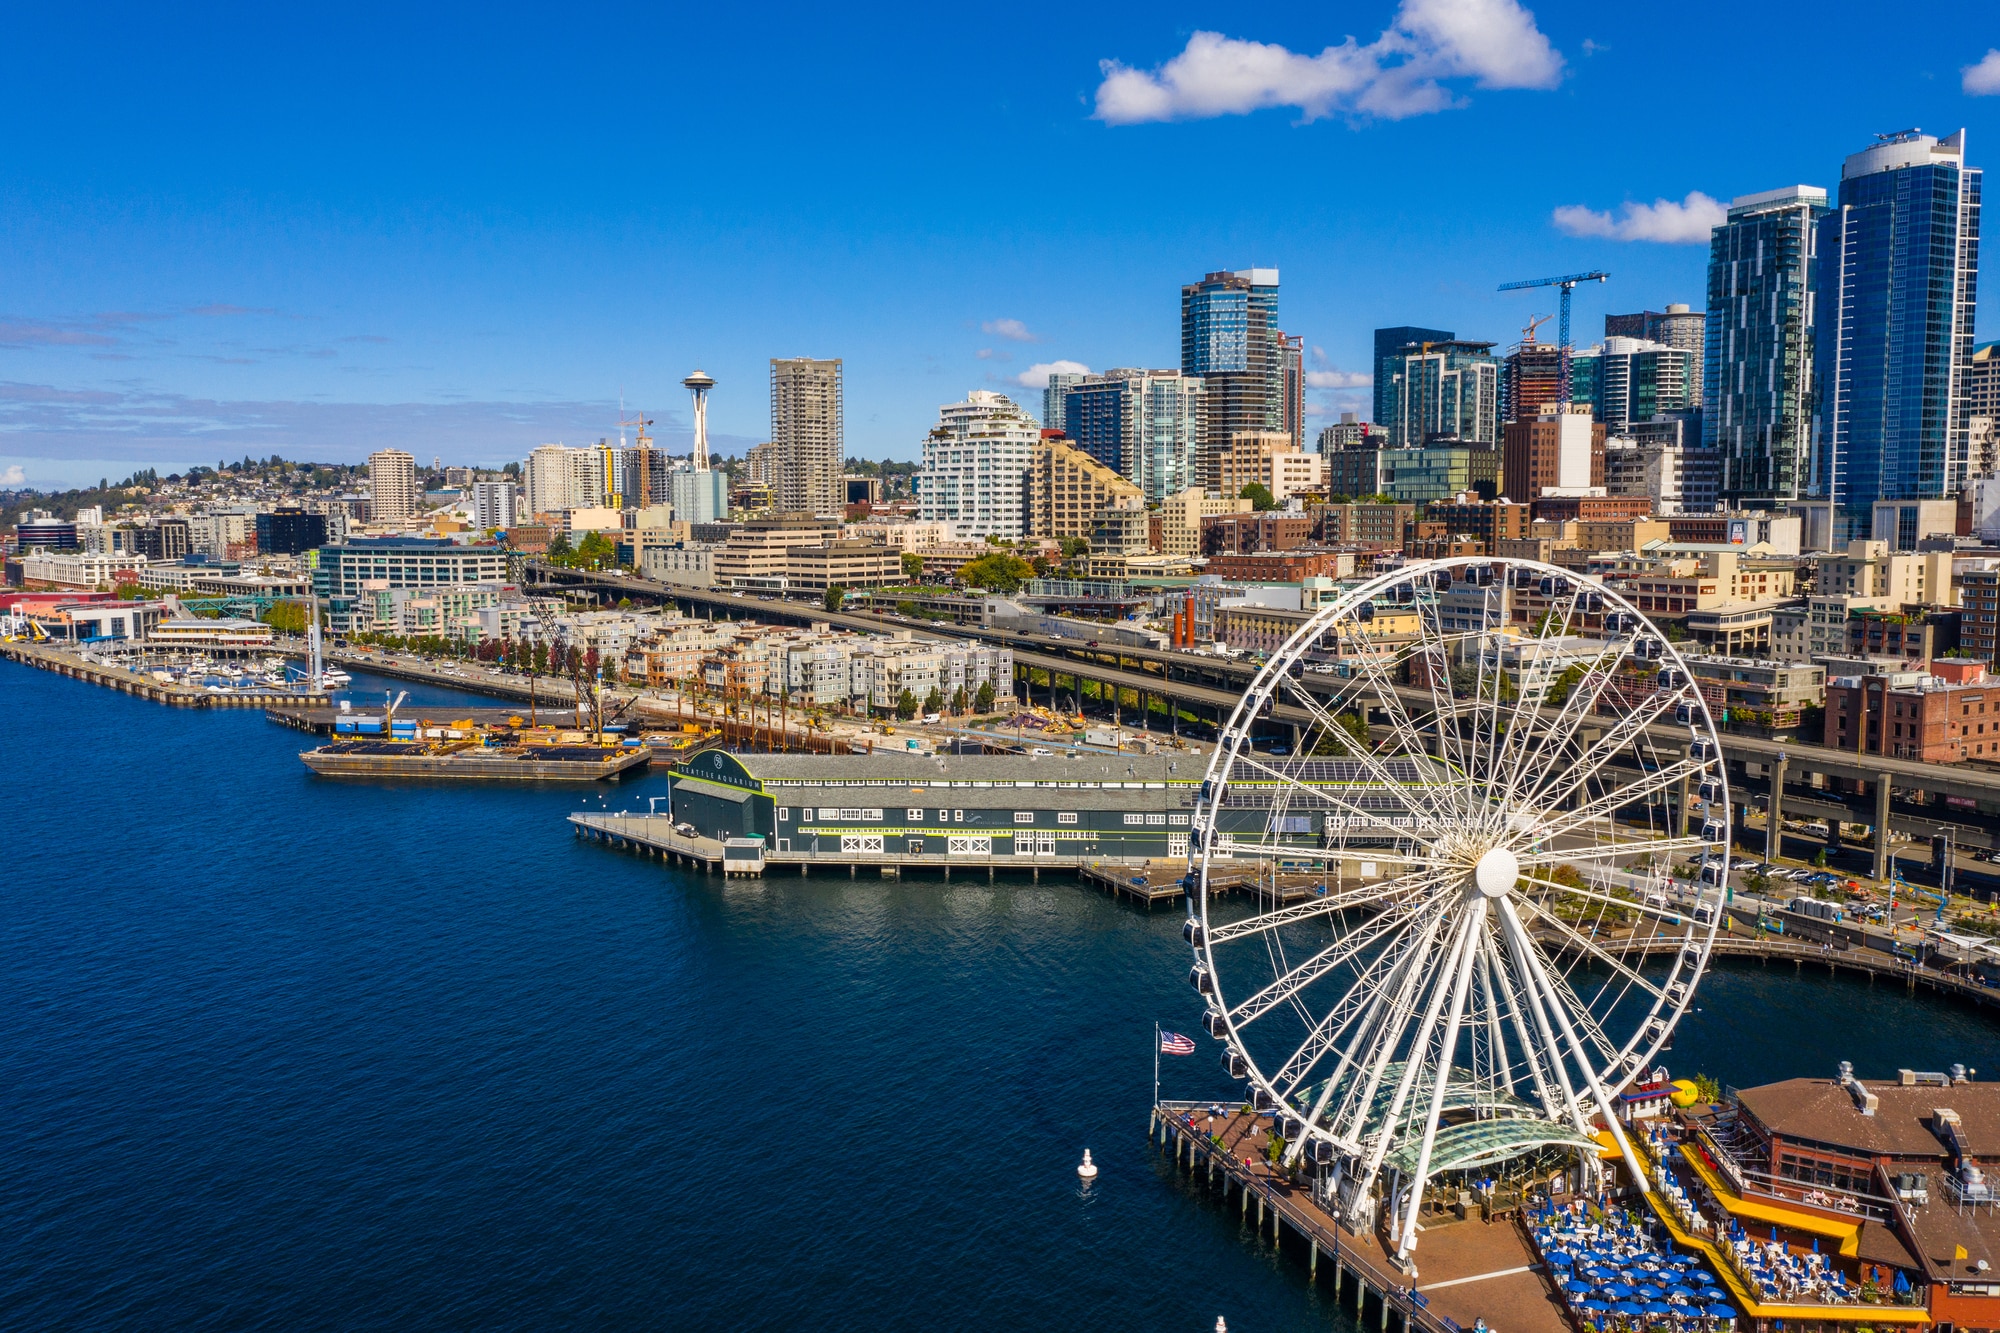 Aerial image of the Seattle Great Wheel